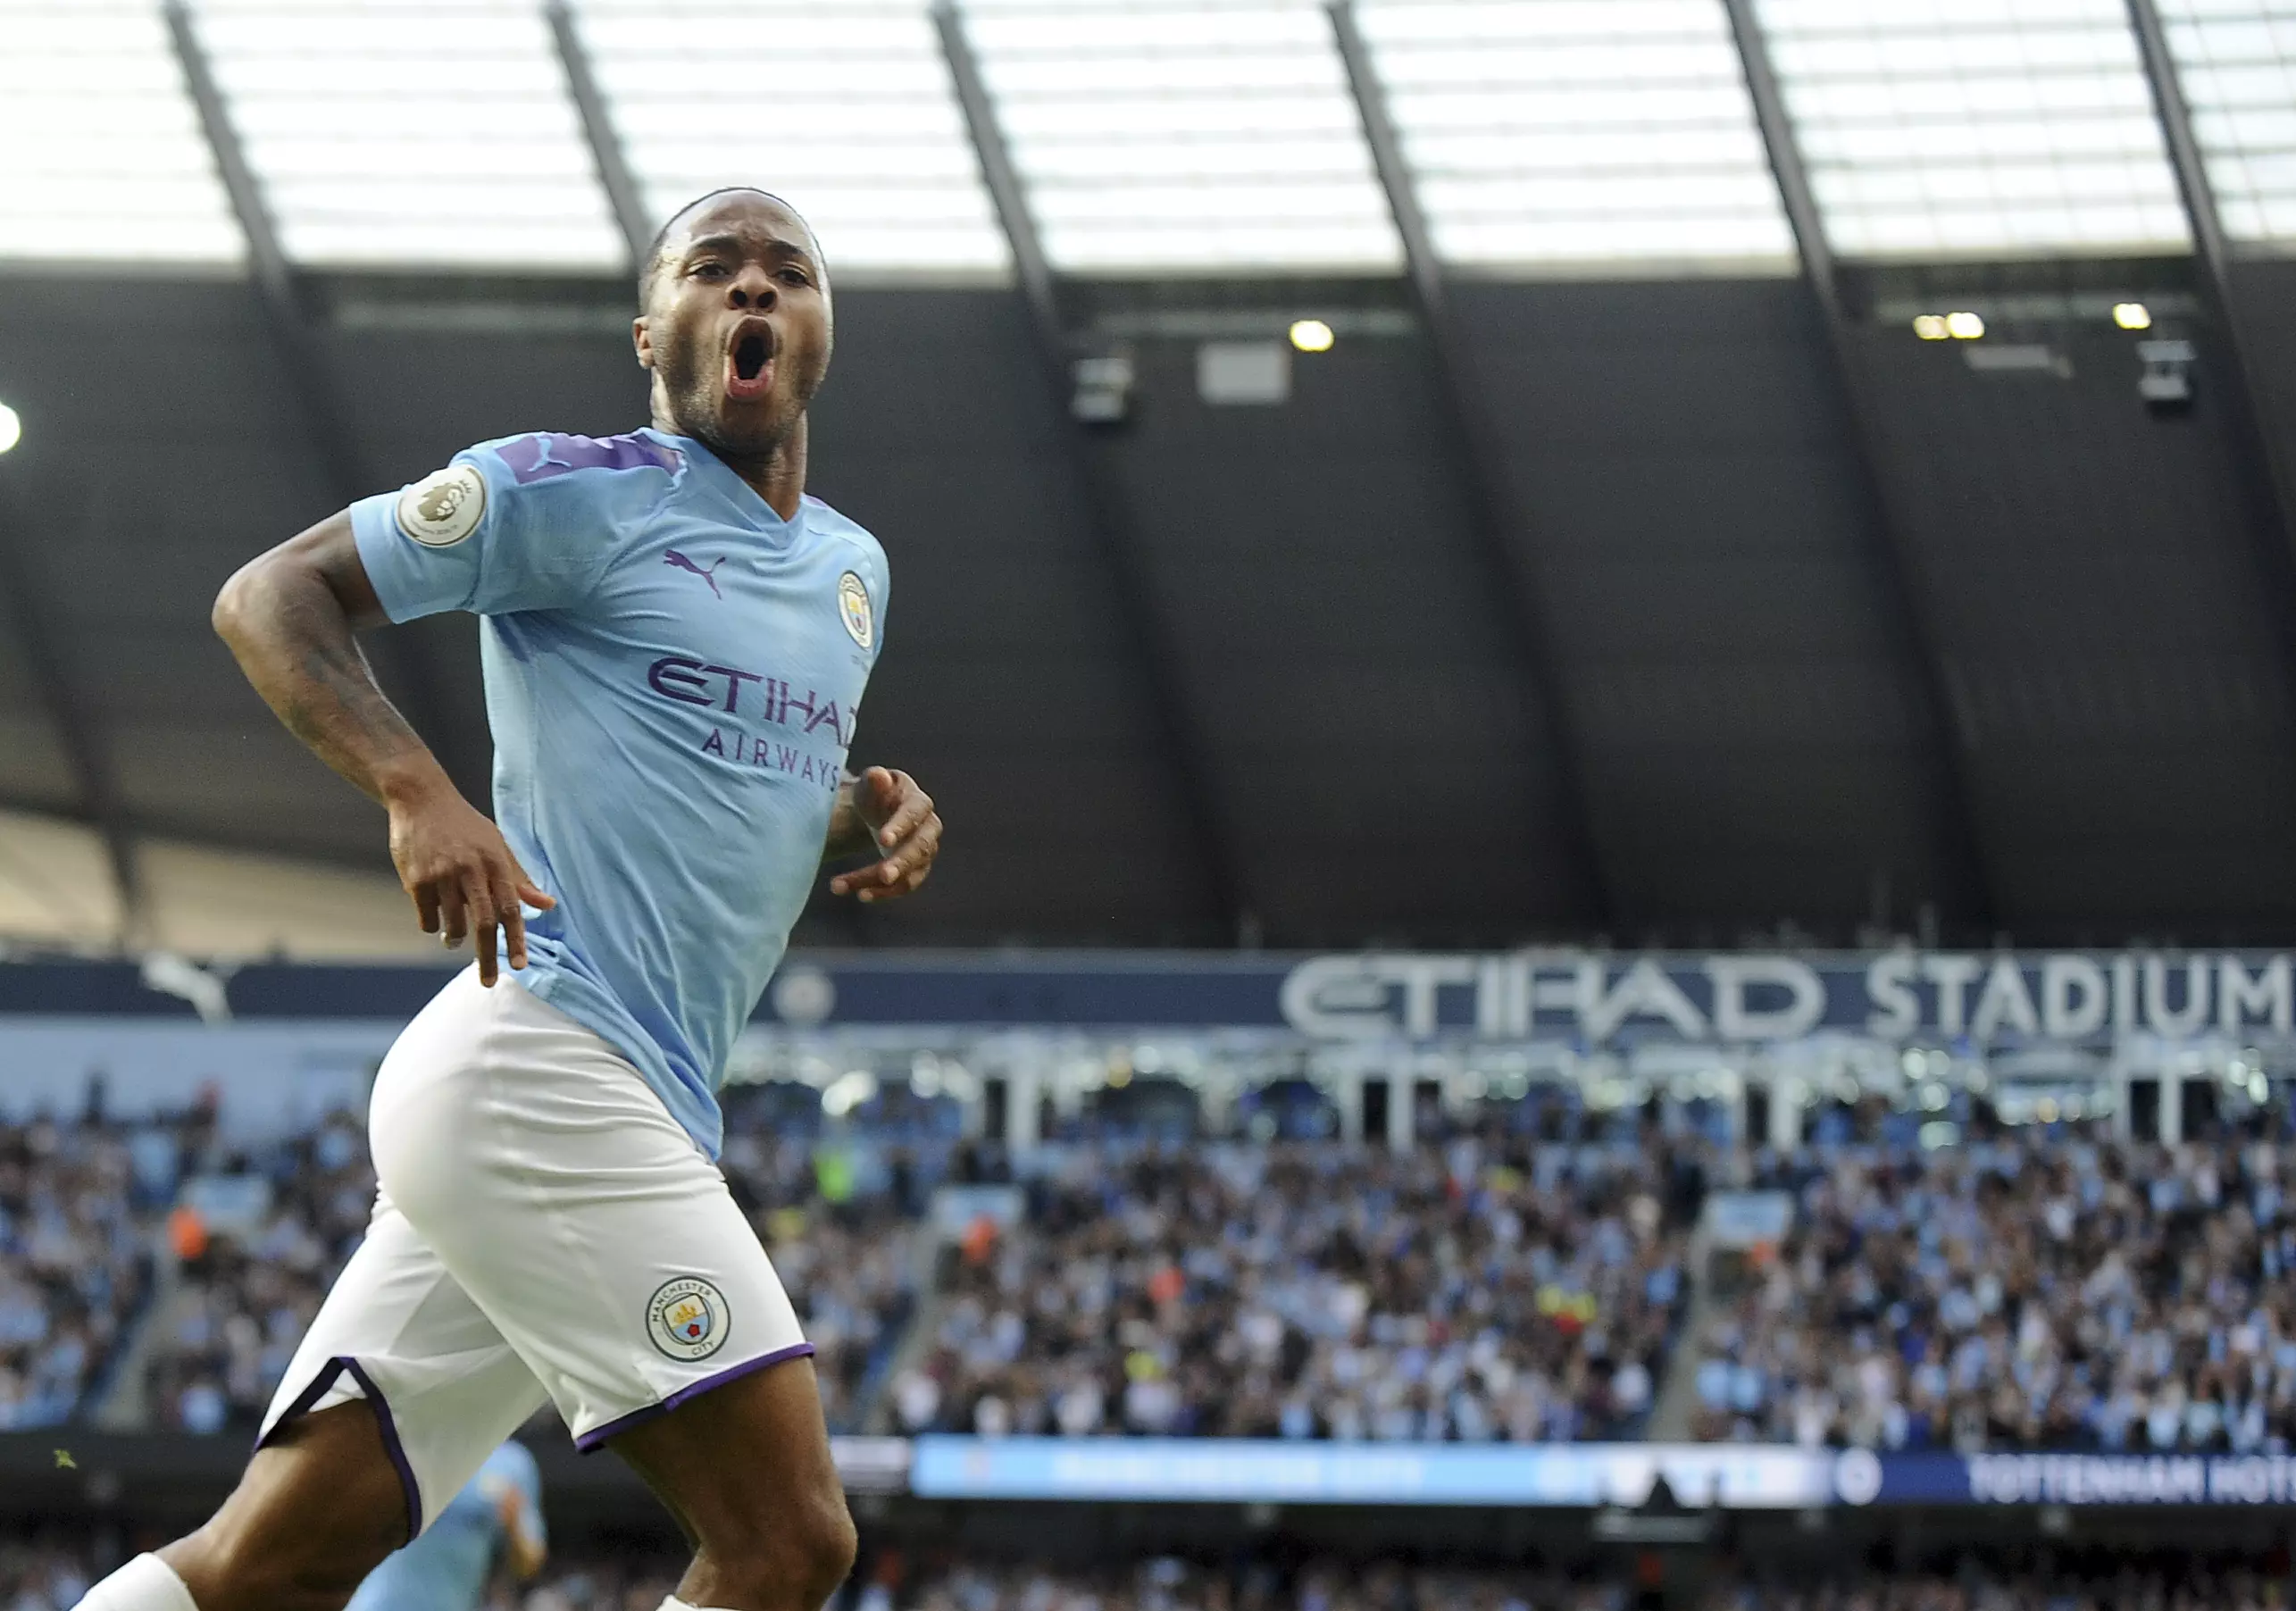 Sterling scored his latest goal against Spurs at the weekend. Image: PA Images